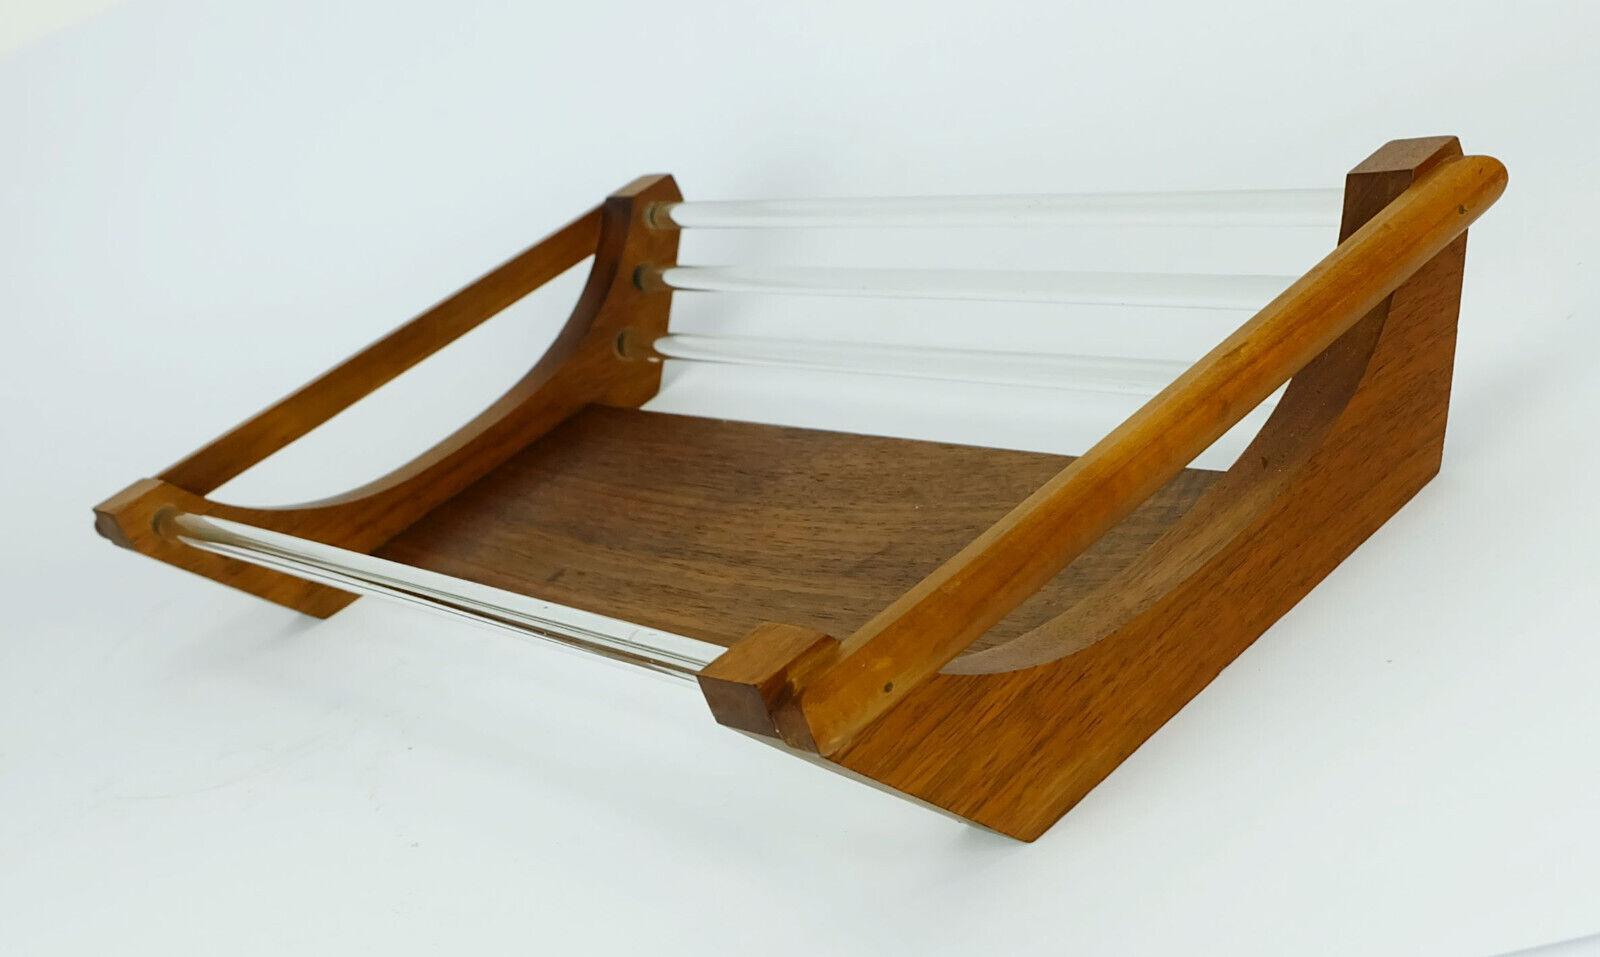 Stunning French 1920s to 1930s fruit basket made of solid walnut and glass in architectural geometric shape. 

Very good condition with slight traces of use.

Dimensions: Length 15 1/3